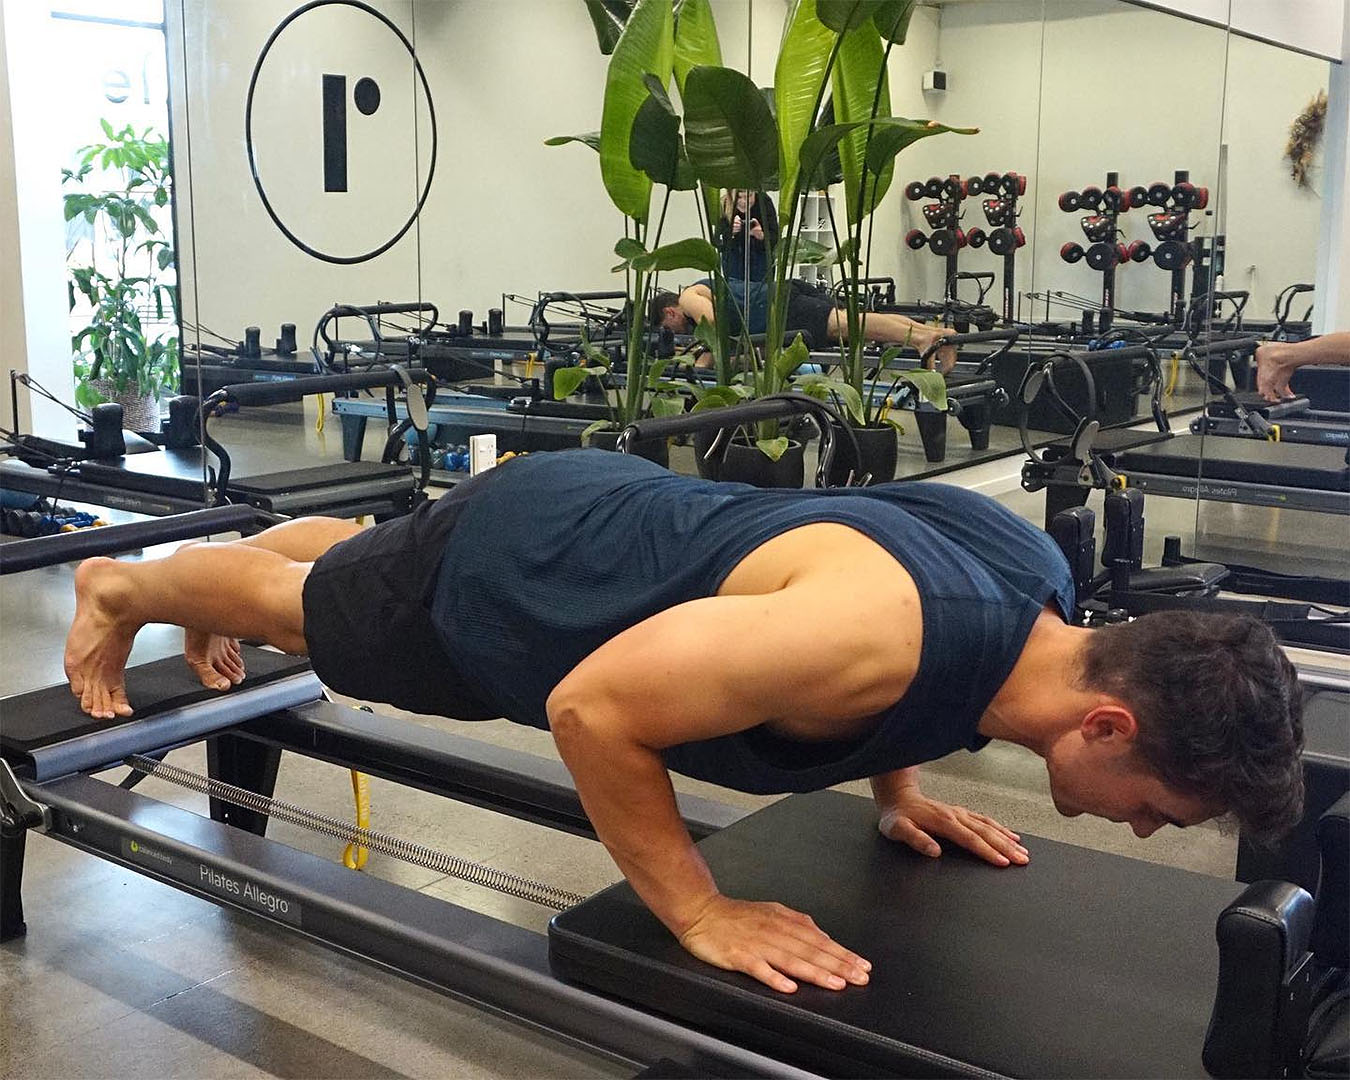 A man works out at Reform Pilates, one of the best pilates studios in Auckland.